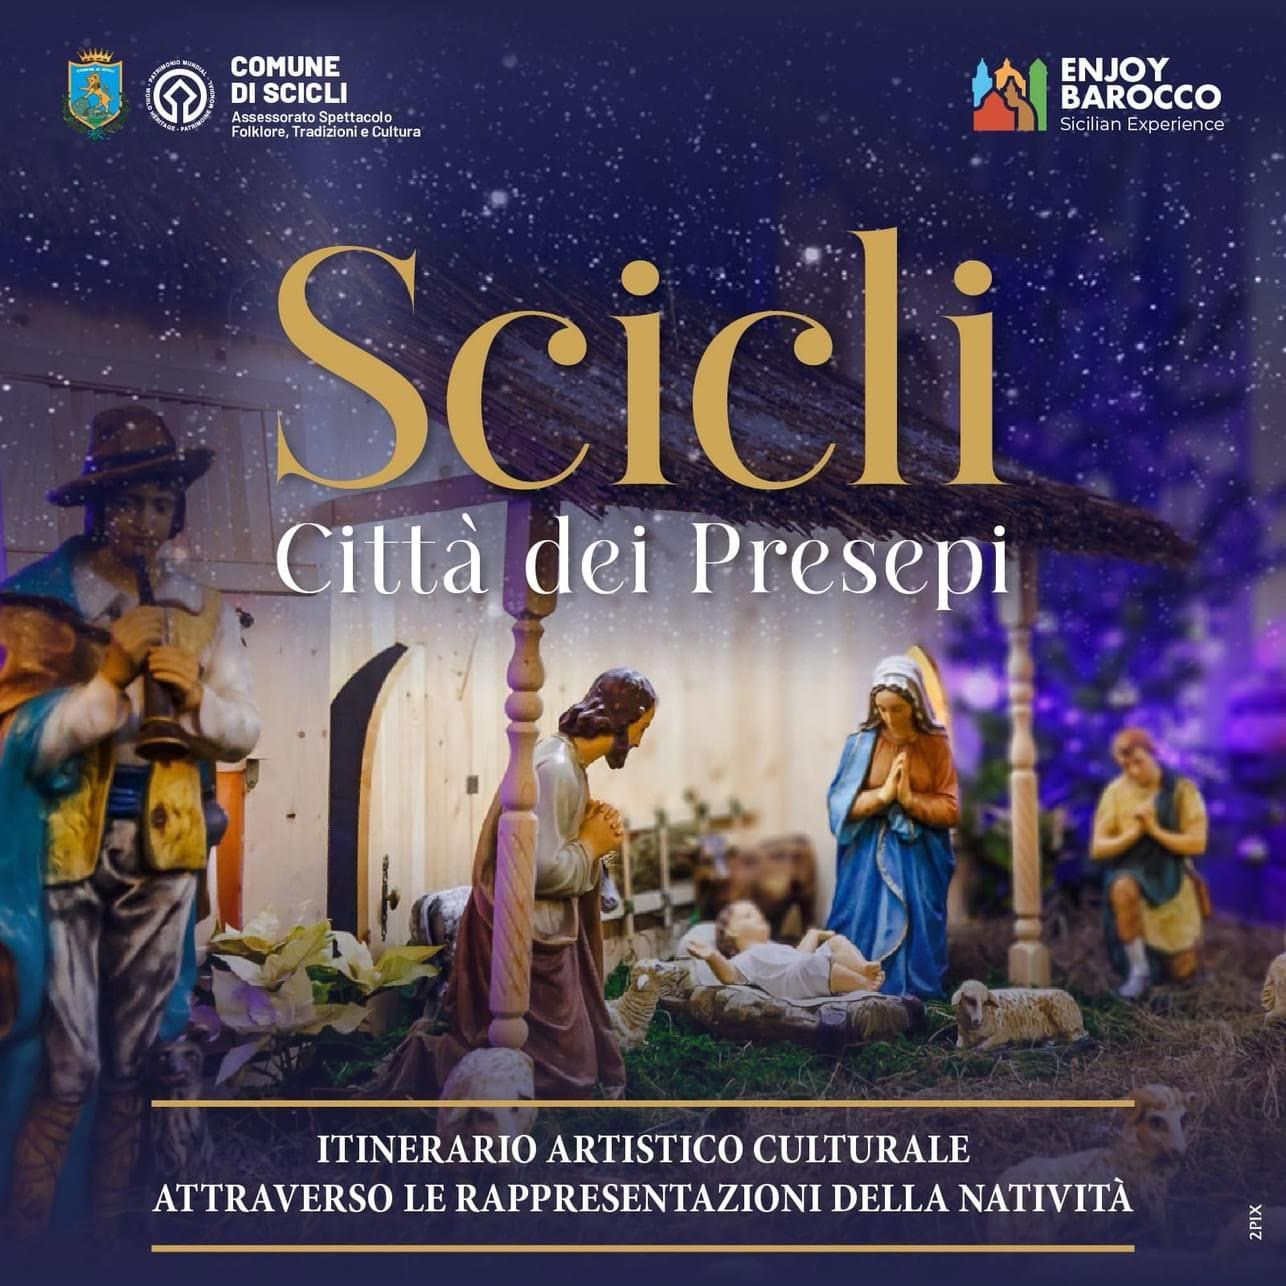 The streets of the Nativity Scenes of Scicli